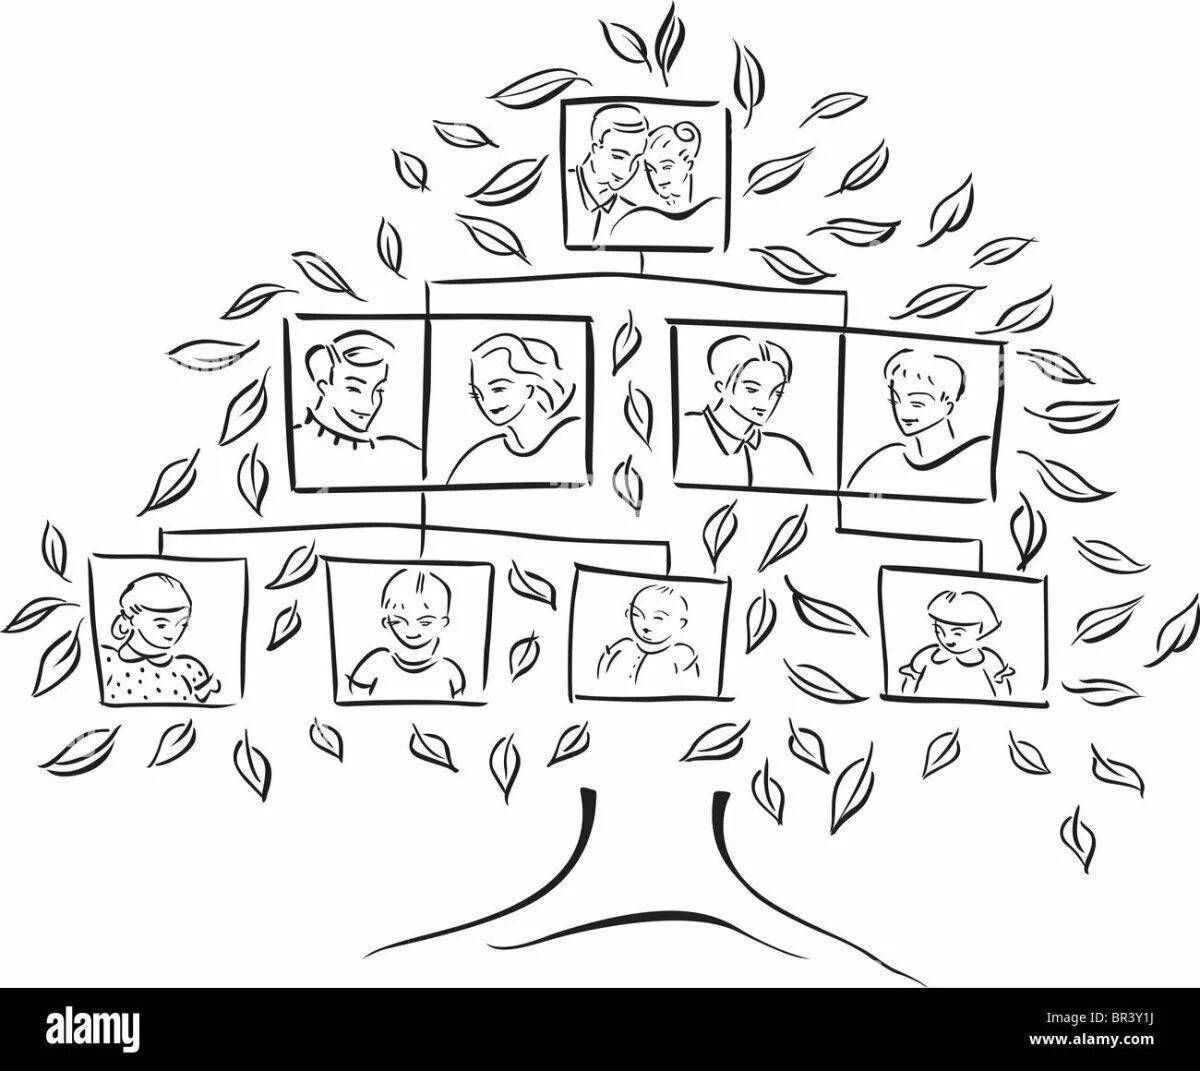 Tempting family tree template